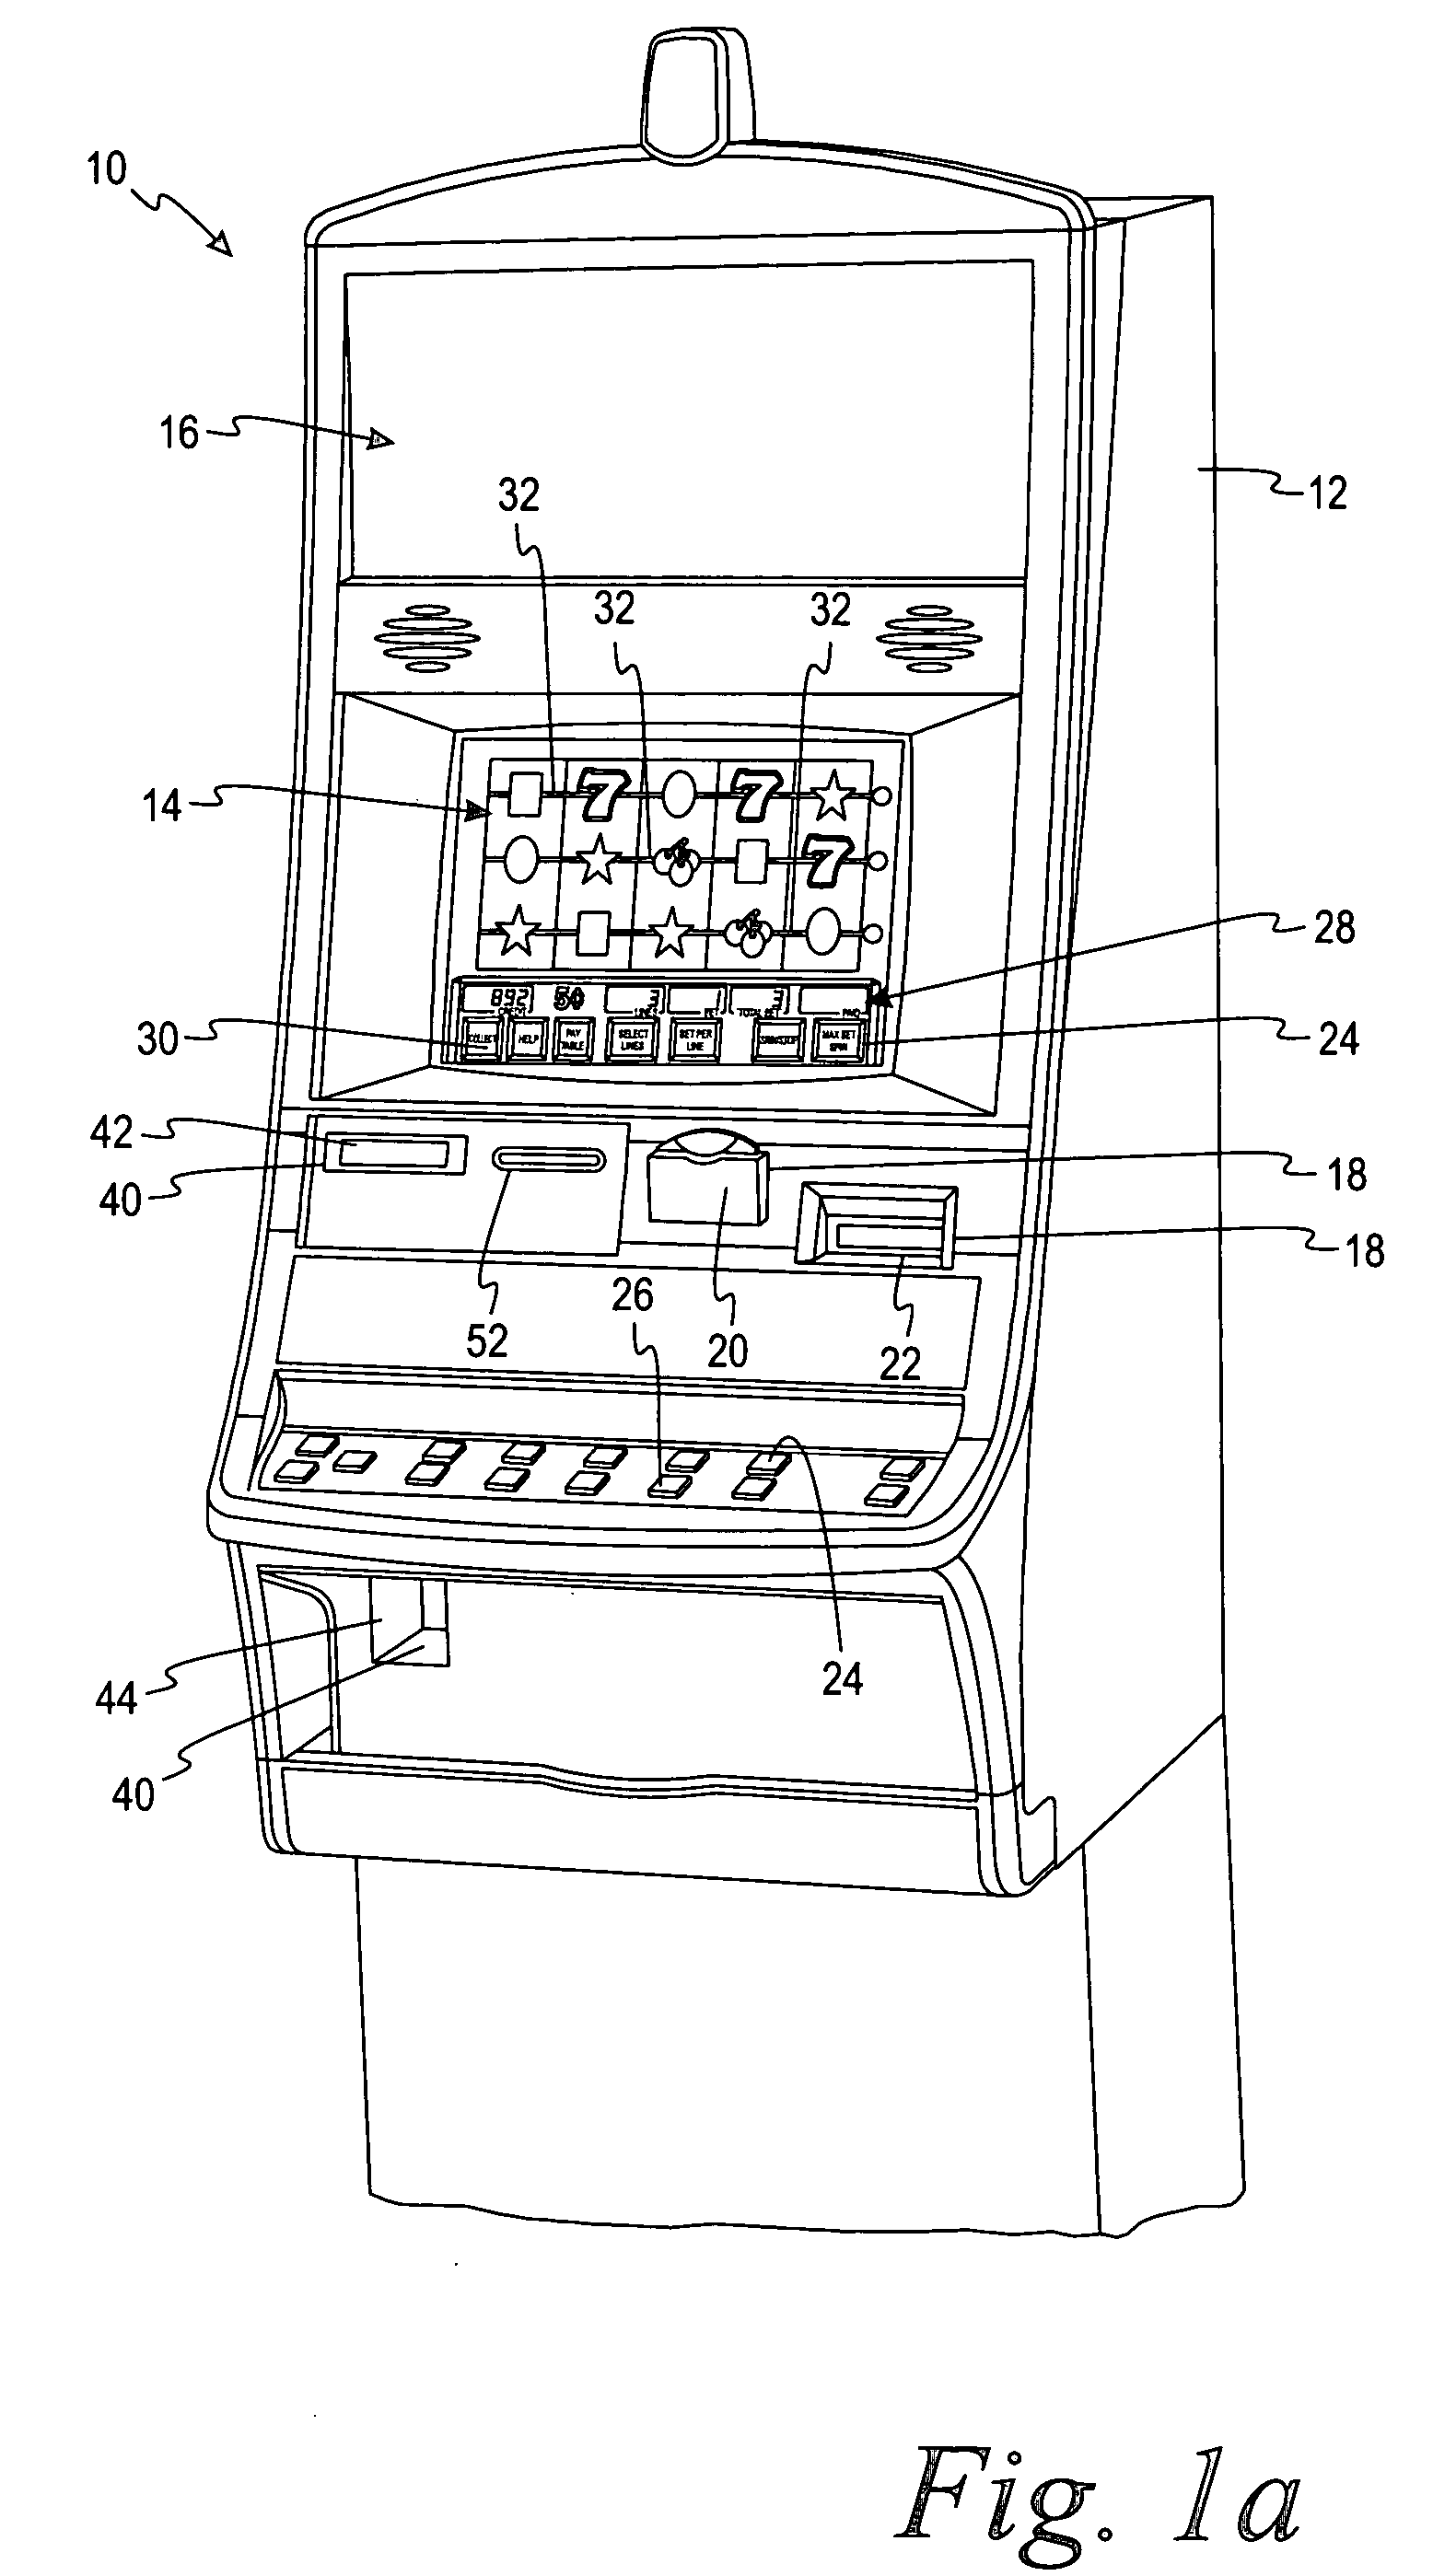 Light sources and displays in a gaming machine